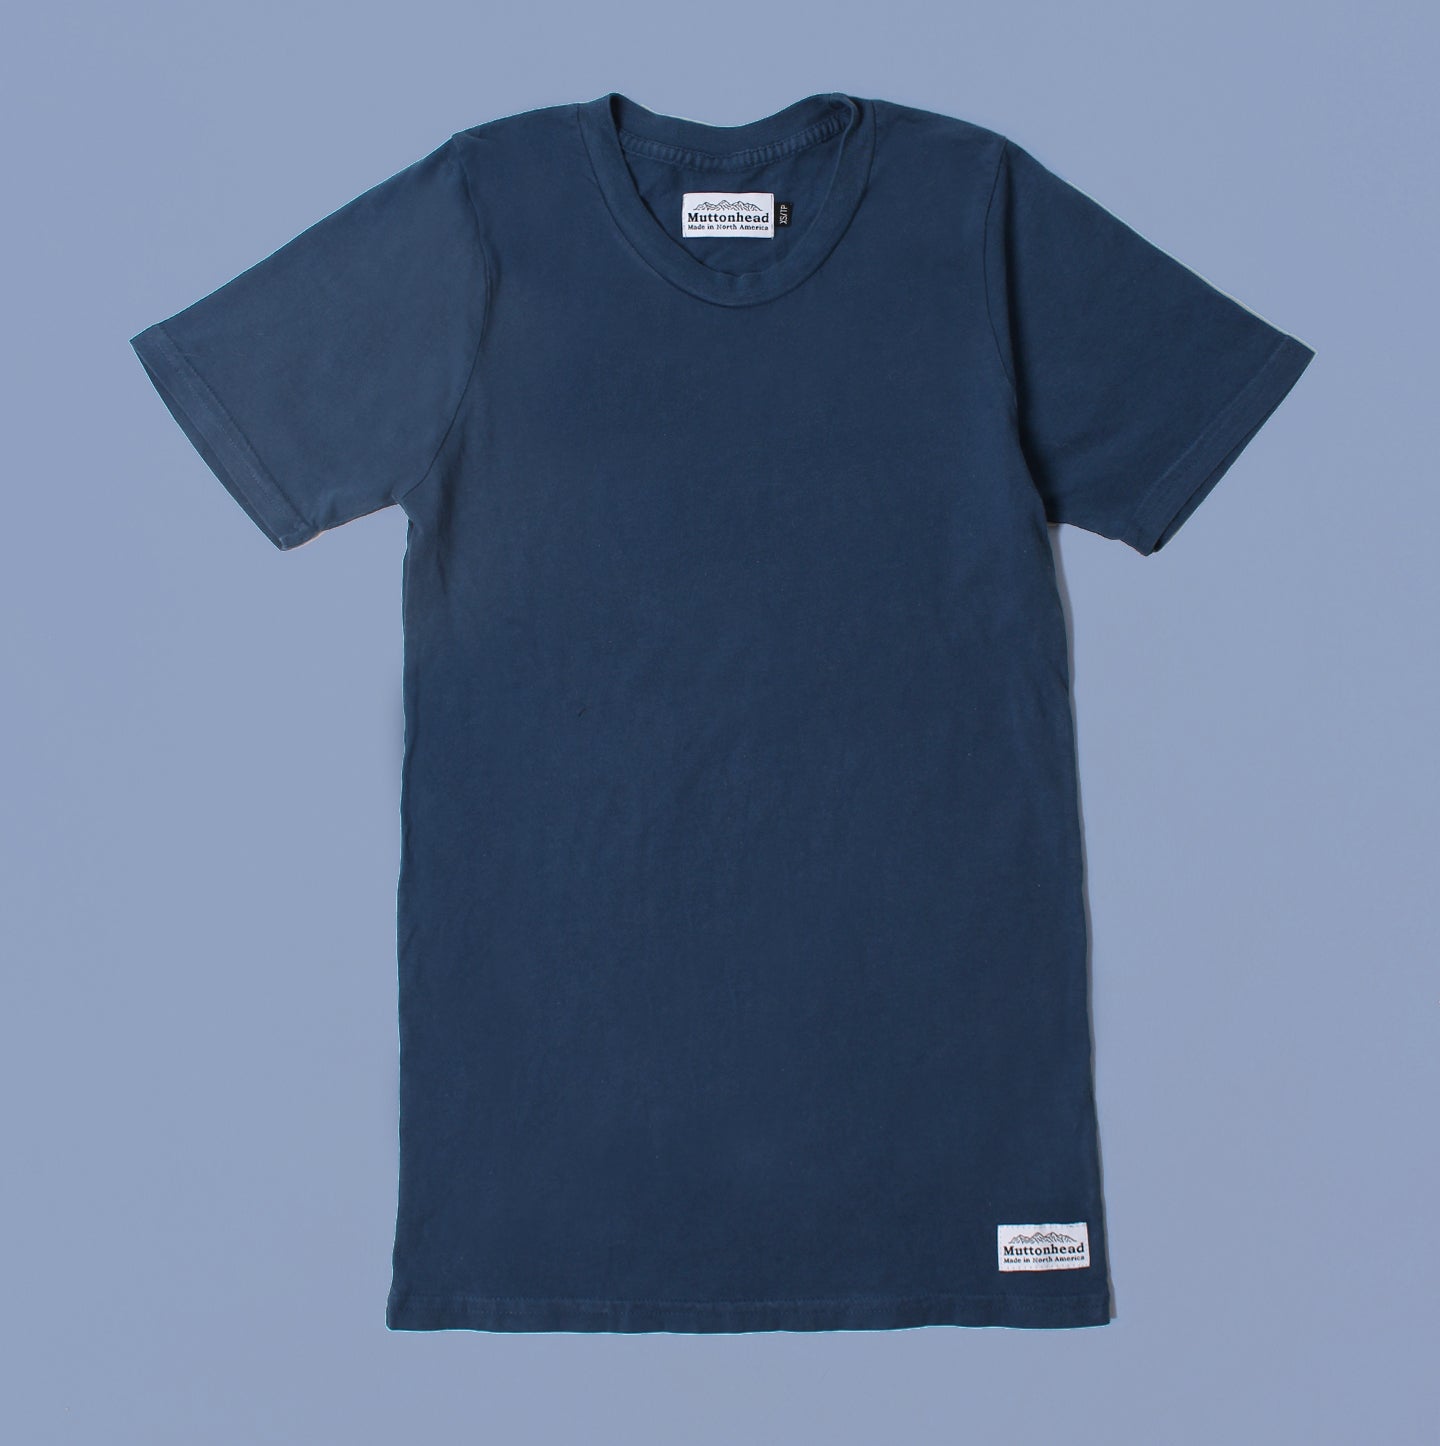 Vintage Pigment Dyed Tee - Washed Ocean